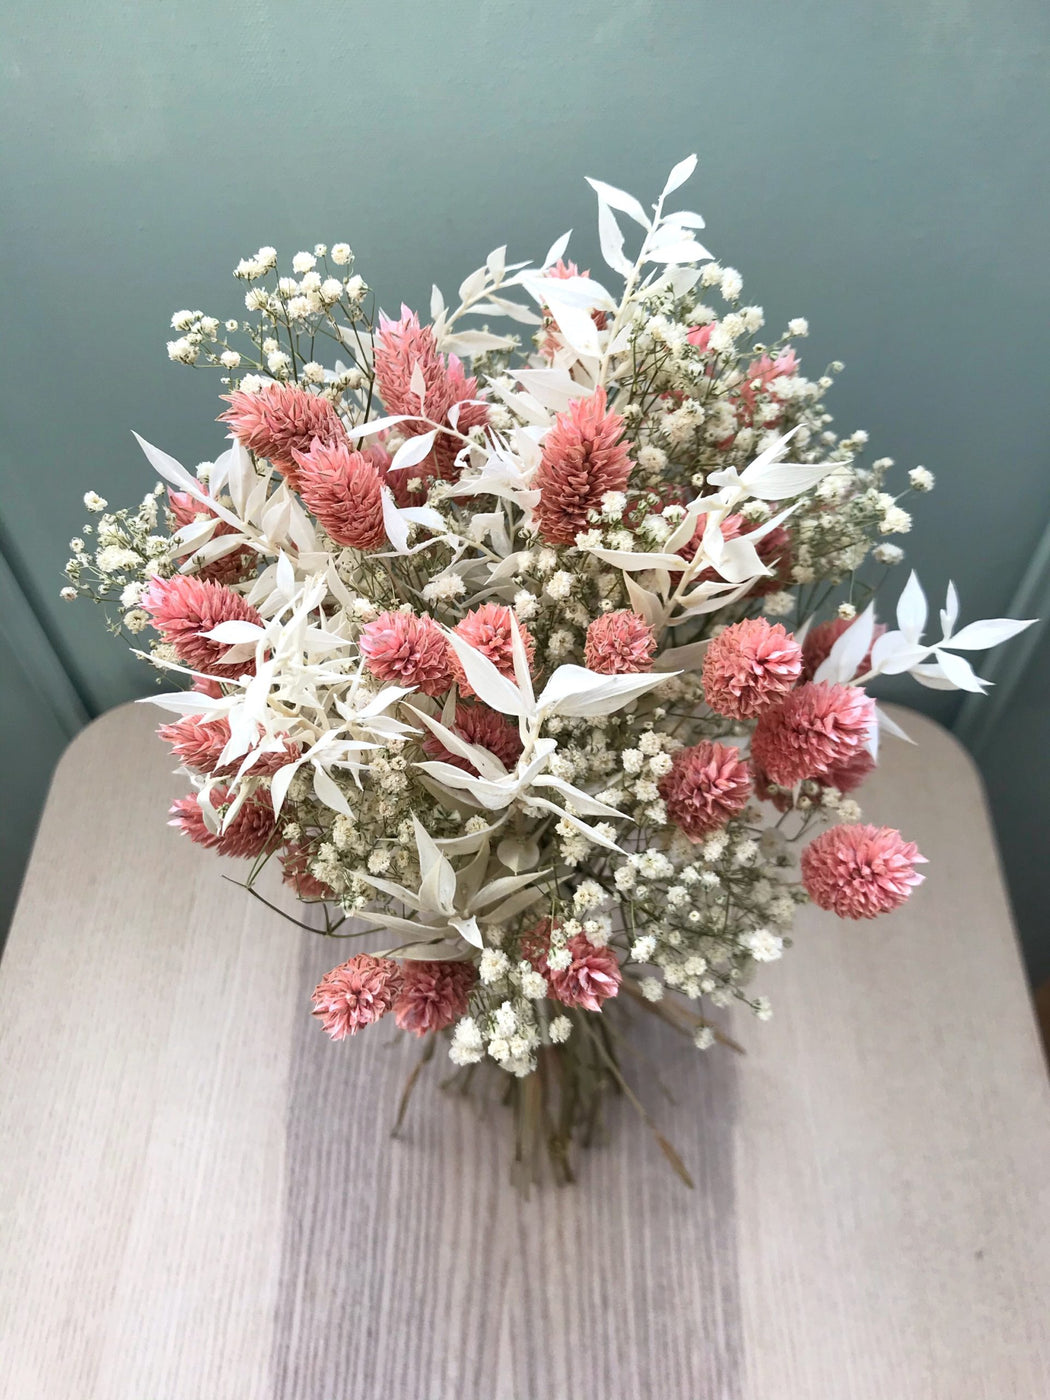 Bouquet of dried and stabilized flowers with gypsophila and canary grass - “Love you” bouquet